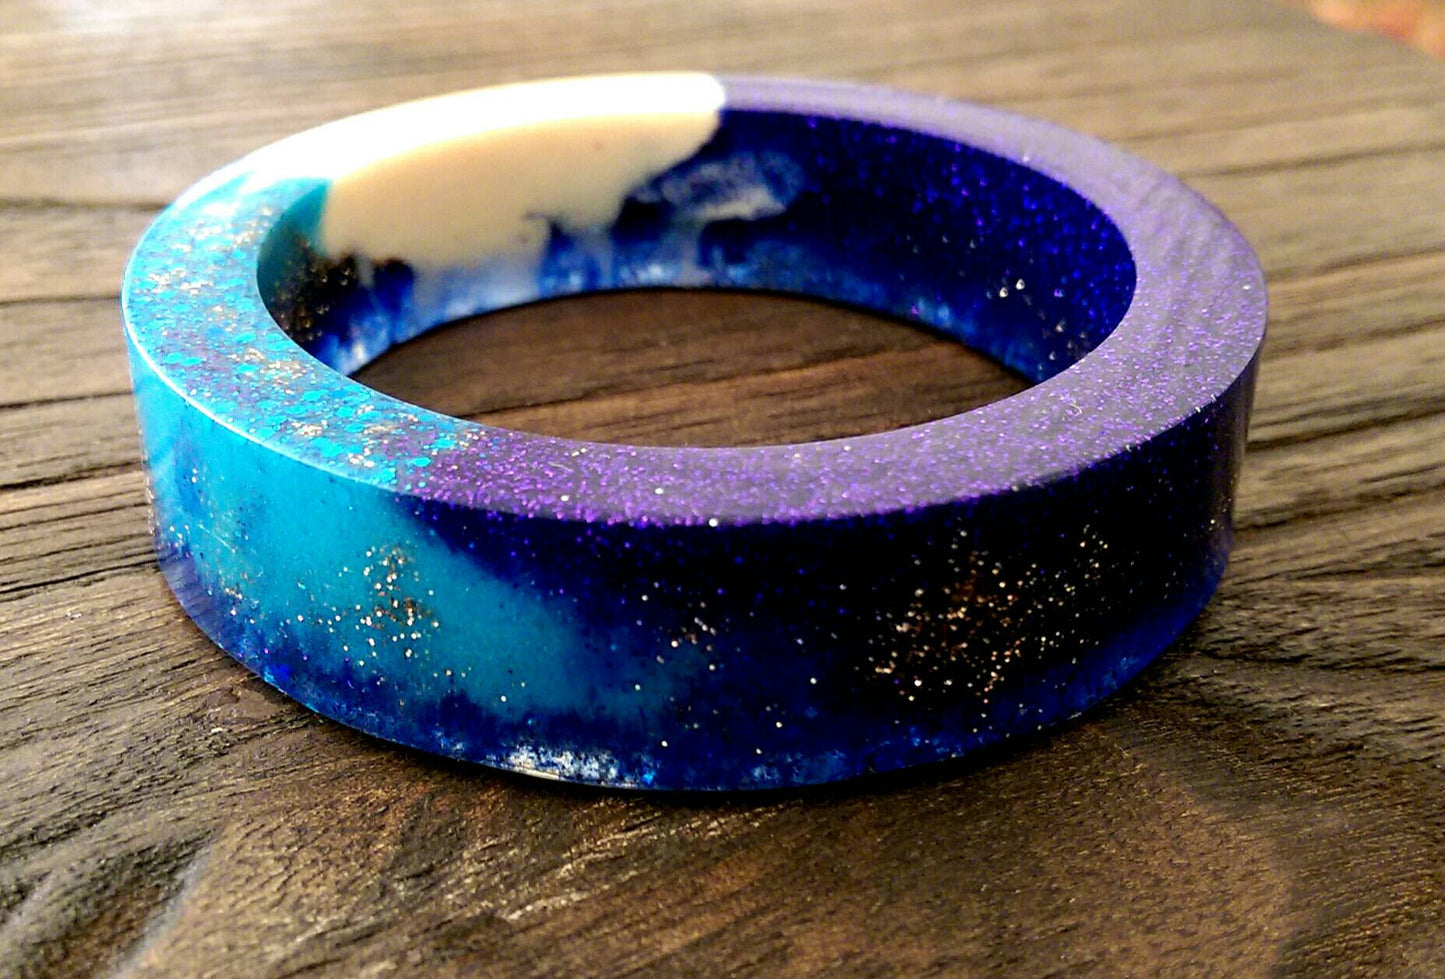 Galaxy Resin Bangle, One of a Kind Mix Blues, White & Glitter Resin Bangle Hand Made 62mm Diameter - Silver and Resin Designs